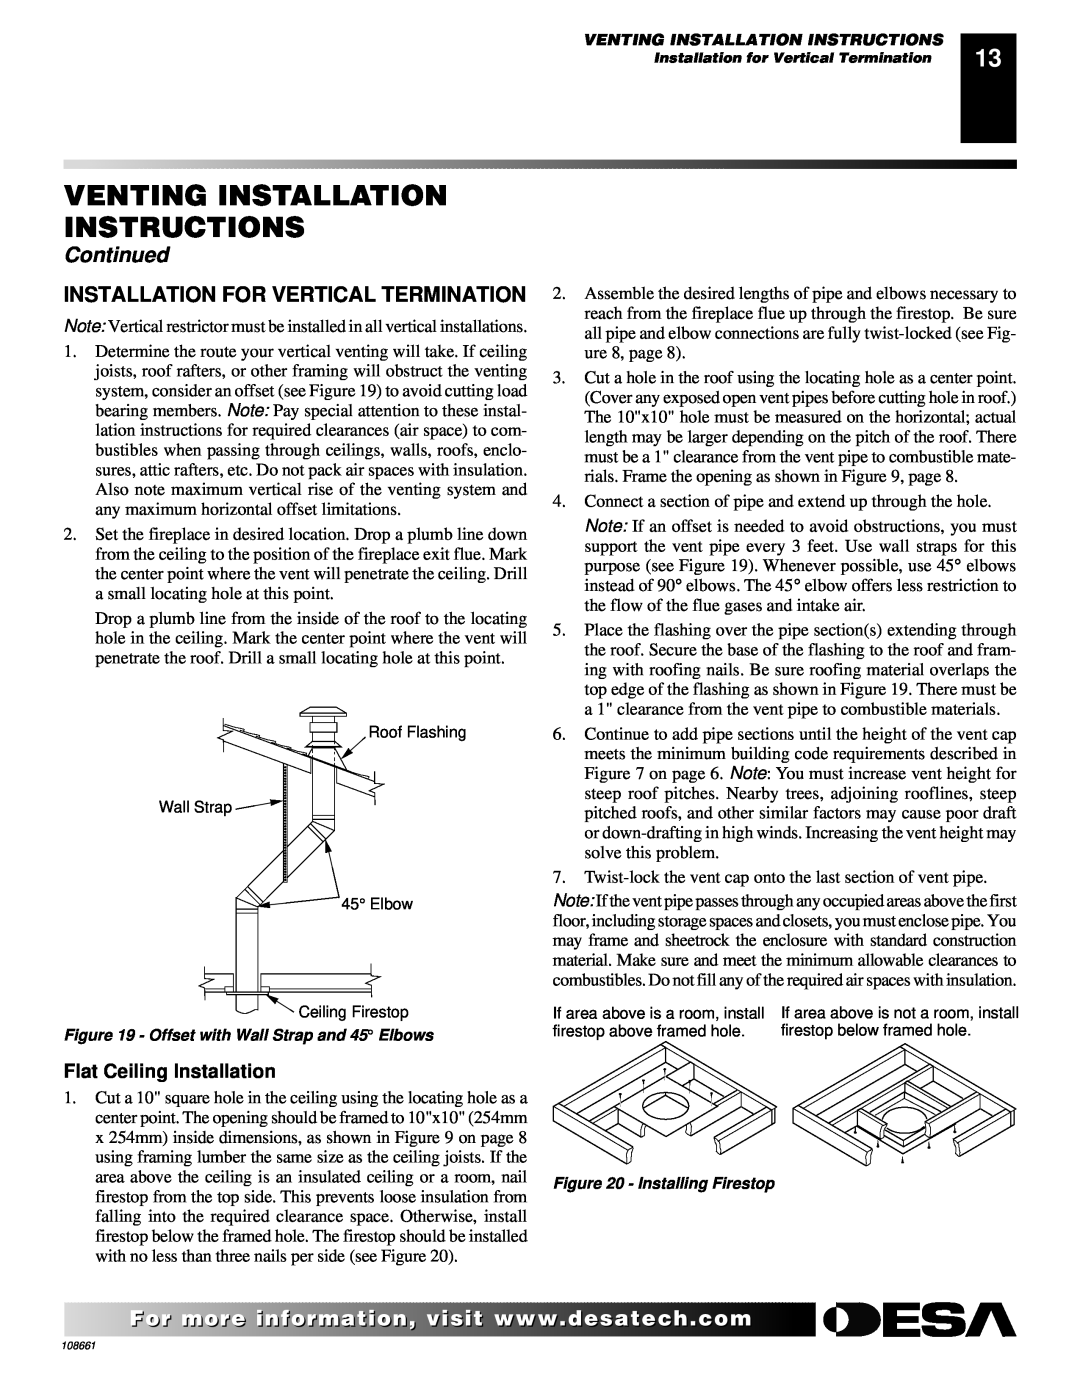 Desa T32N, T36N, T32P, T36P Venting Installation Instructions, Continued, Installation For Vertical Termination 